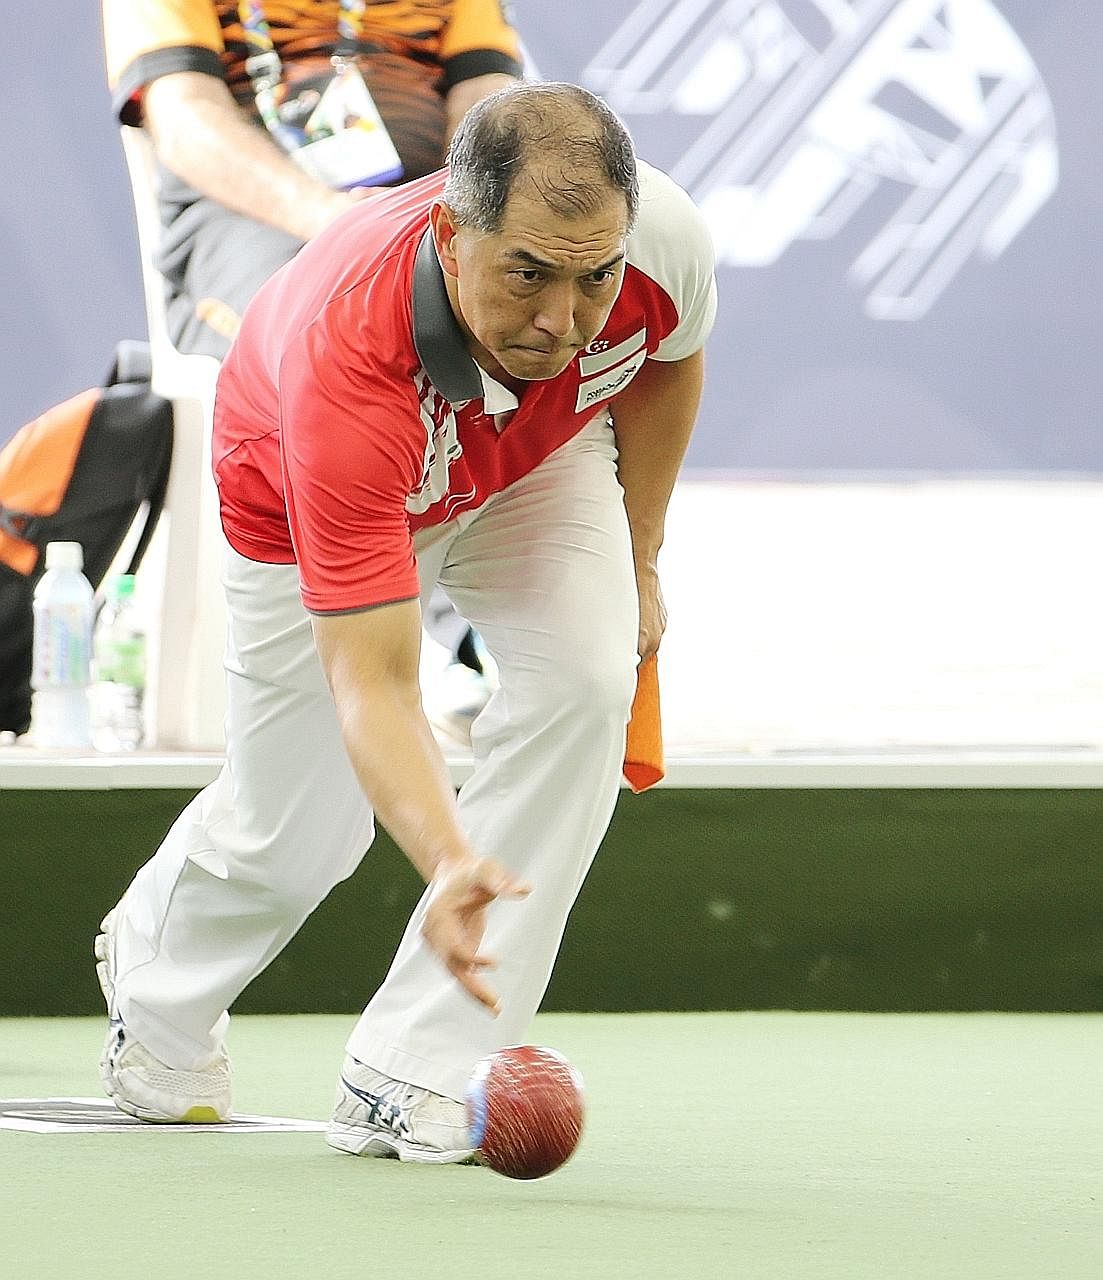 Lee Yuan Min competing in the lawn bowls men's singles final against Malaysia's Muhammad Soufi Rusli. He lost 6-21 but his silver makes him Team Singapore's oldest medallist at the Kuala Lumpur Games.